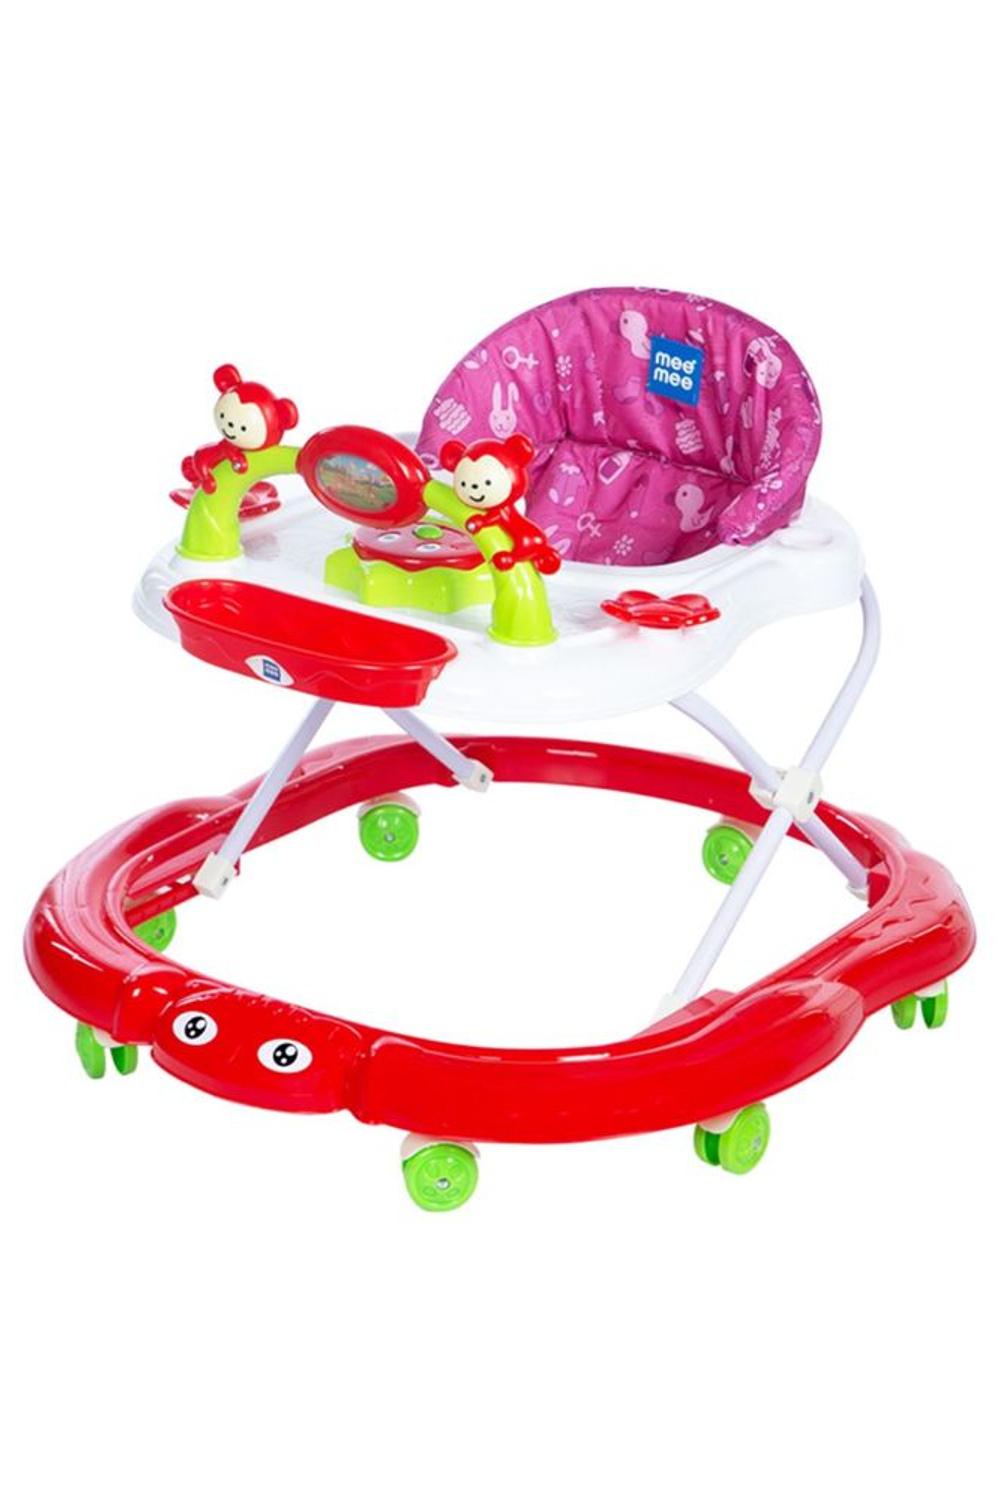 Mee Mee Simple Step Baby Walker With Push Walker Support Handle & Musical Activity Tray